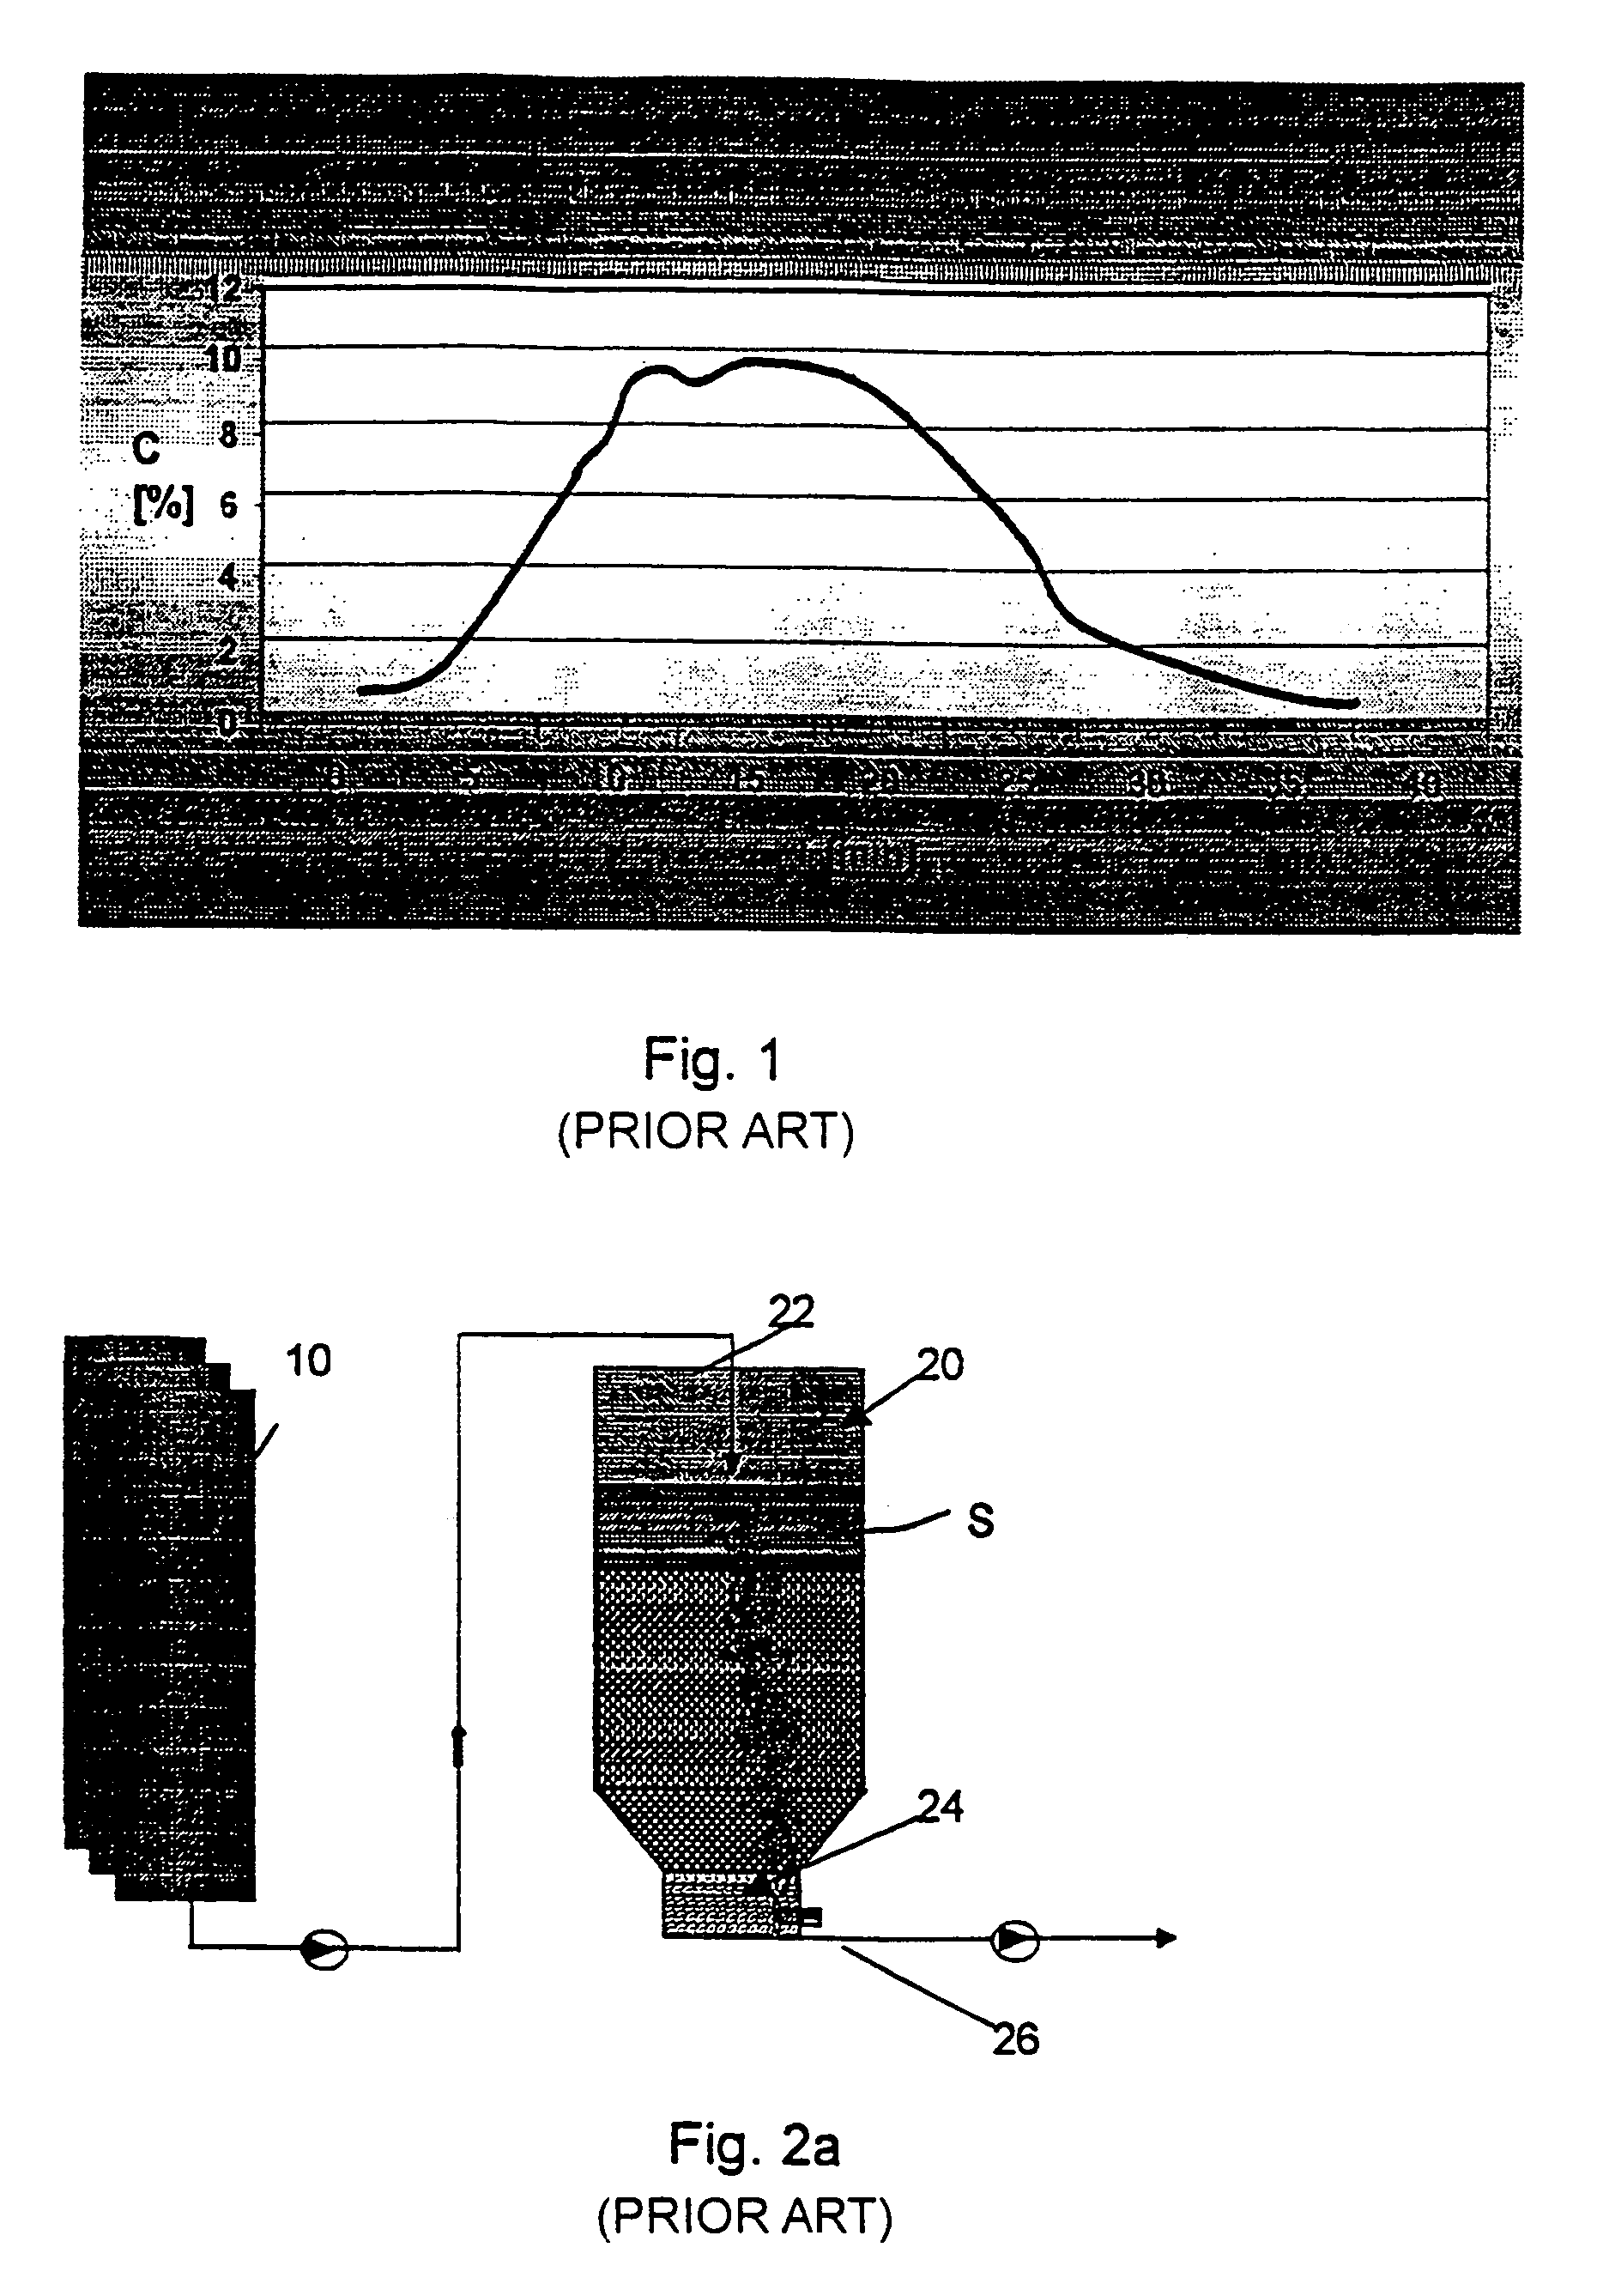 Process for feeding pulp into a blow tank or storage tank